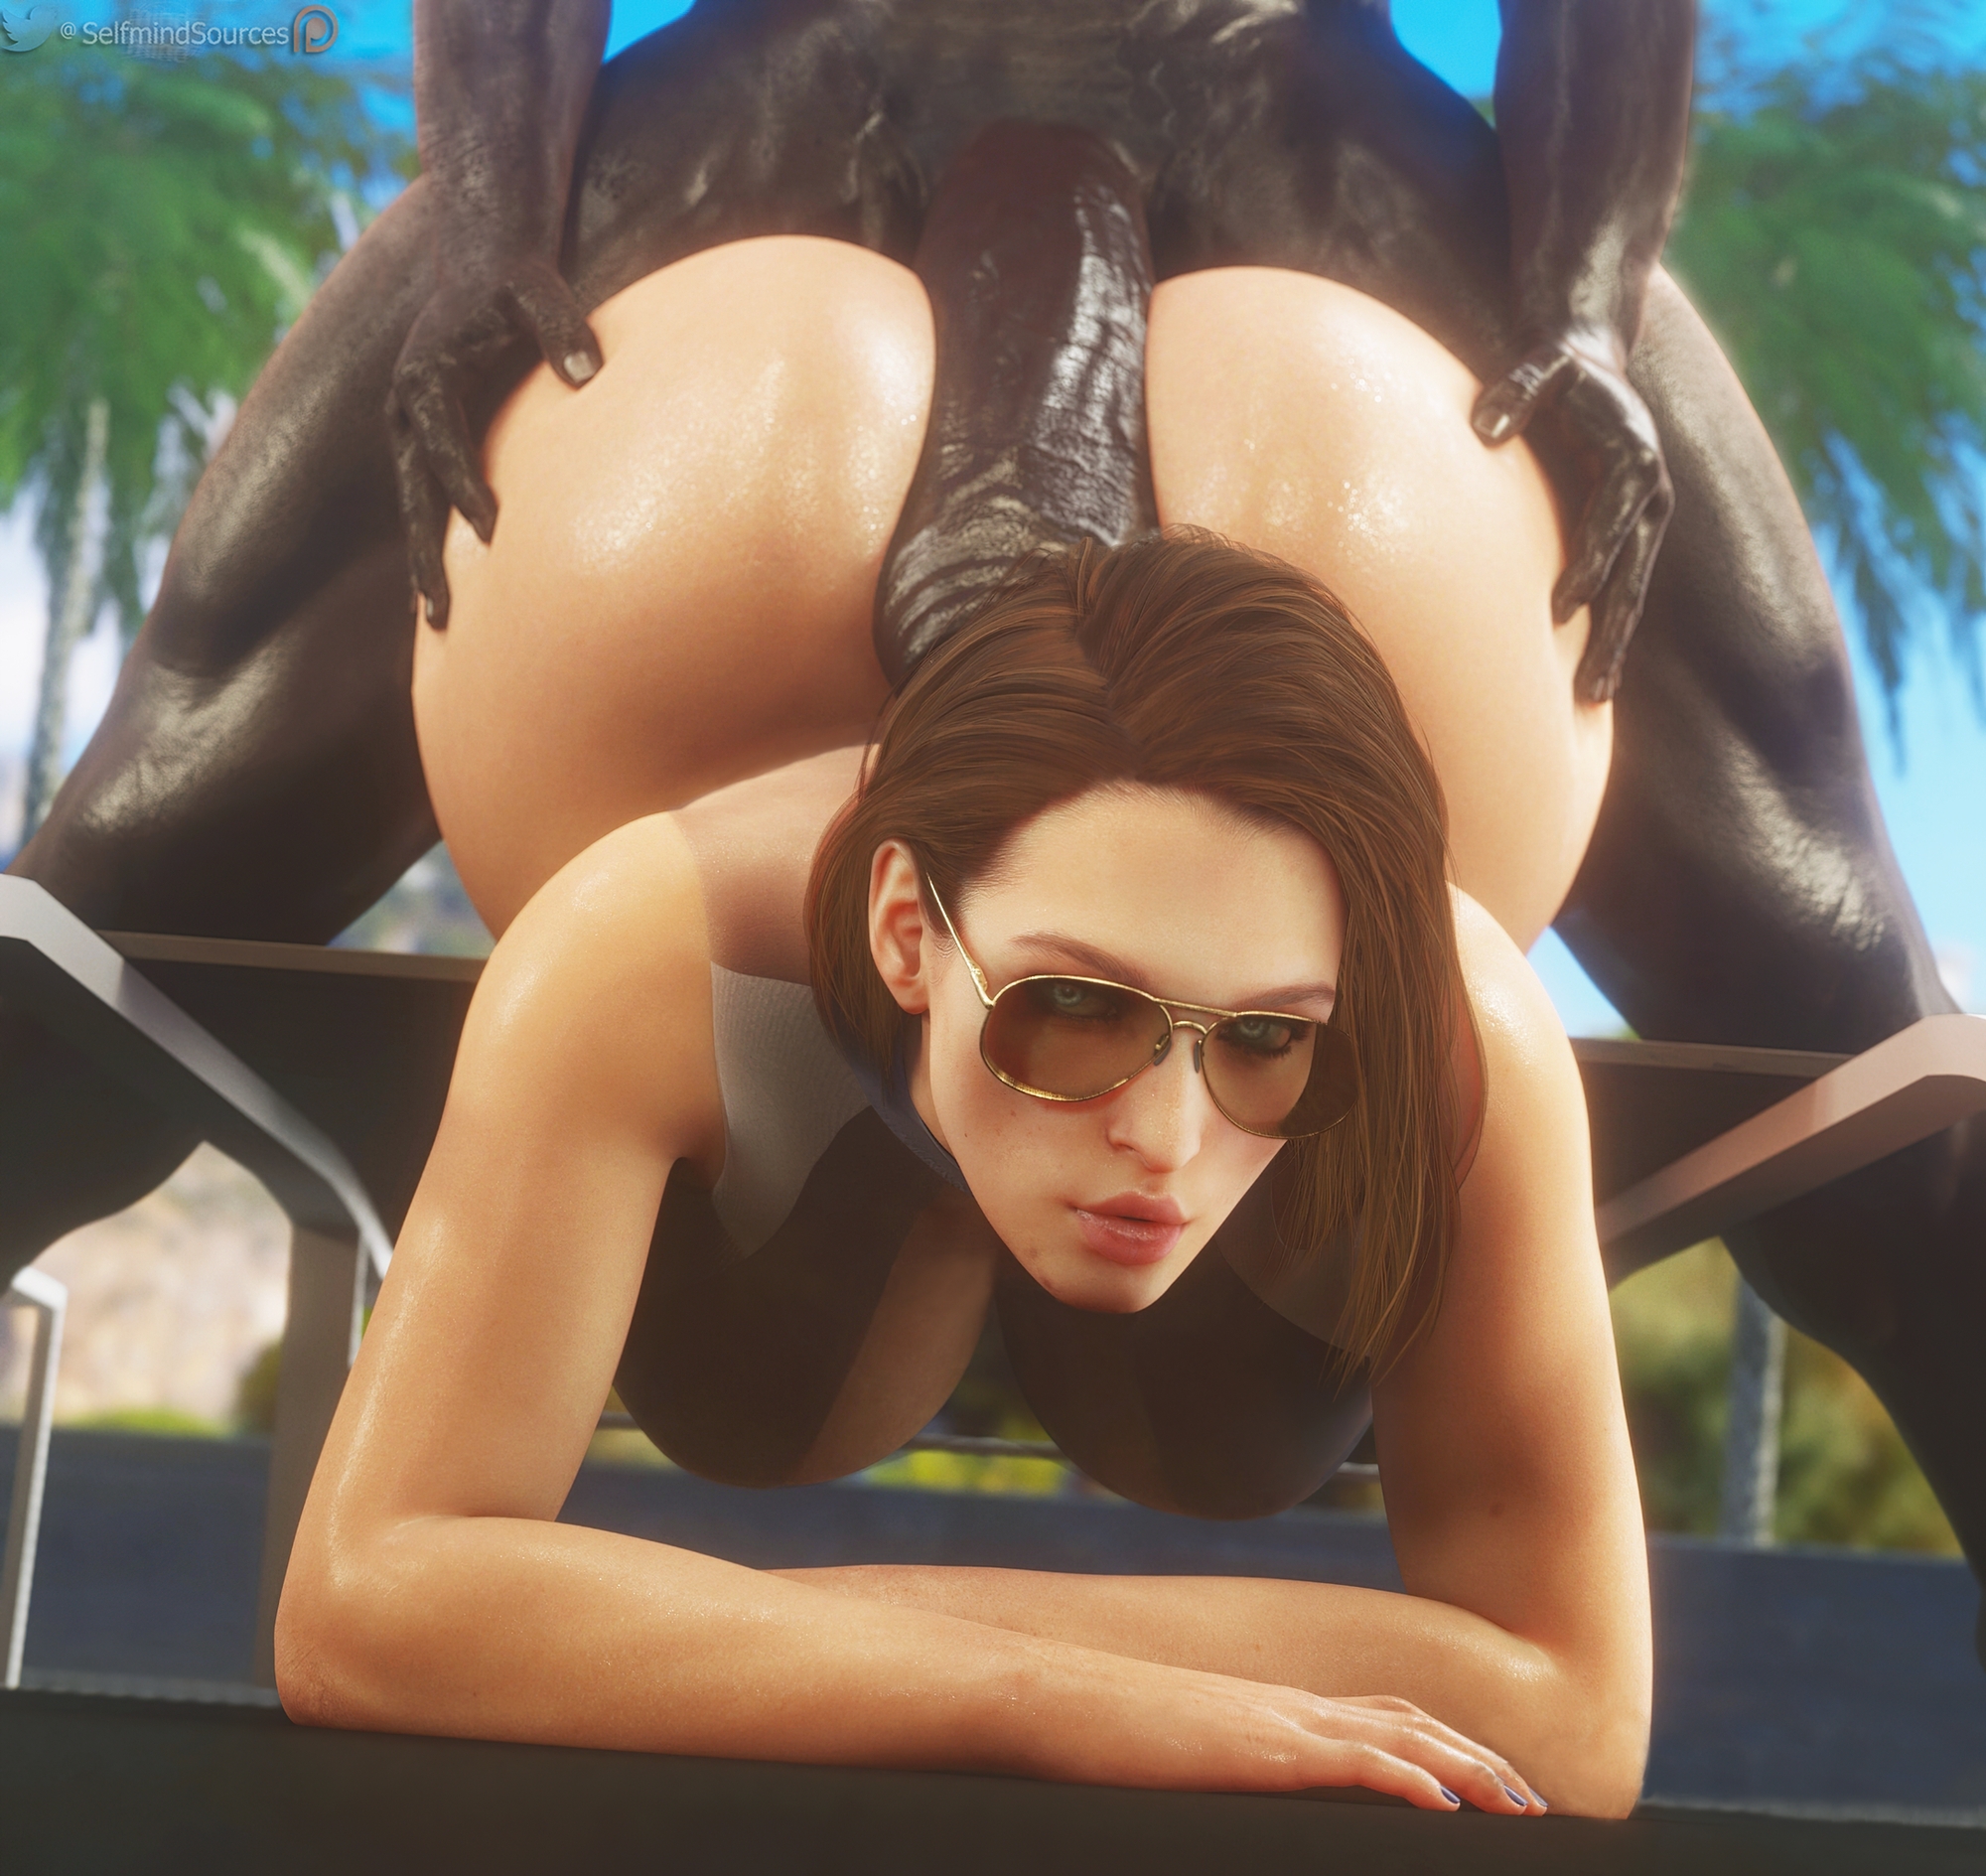 Thicc booty Jill wet buttjob Resident Evil Jill Valentine 3d Porn Naked Big Ass Big Booty Fuck From Behind Ass Cheeks Fuck Bbc Bwc Doggy Style 4